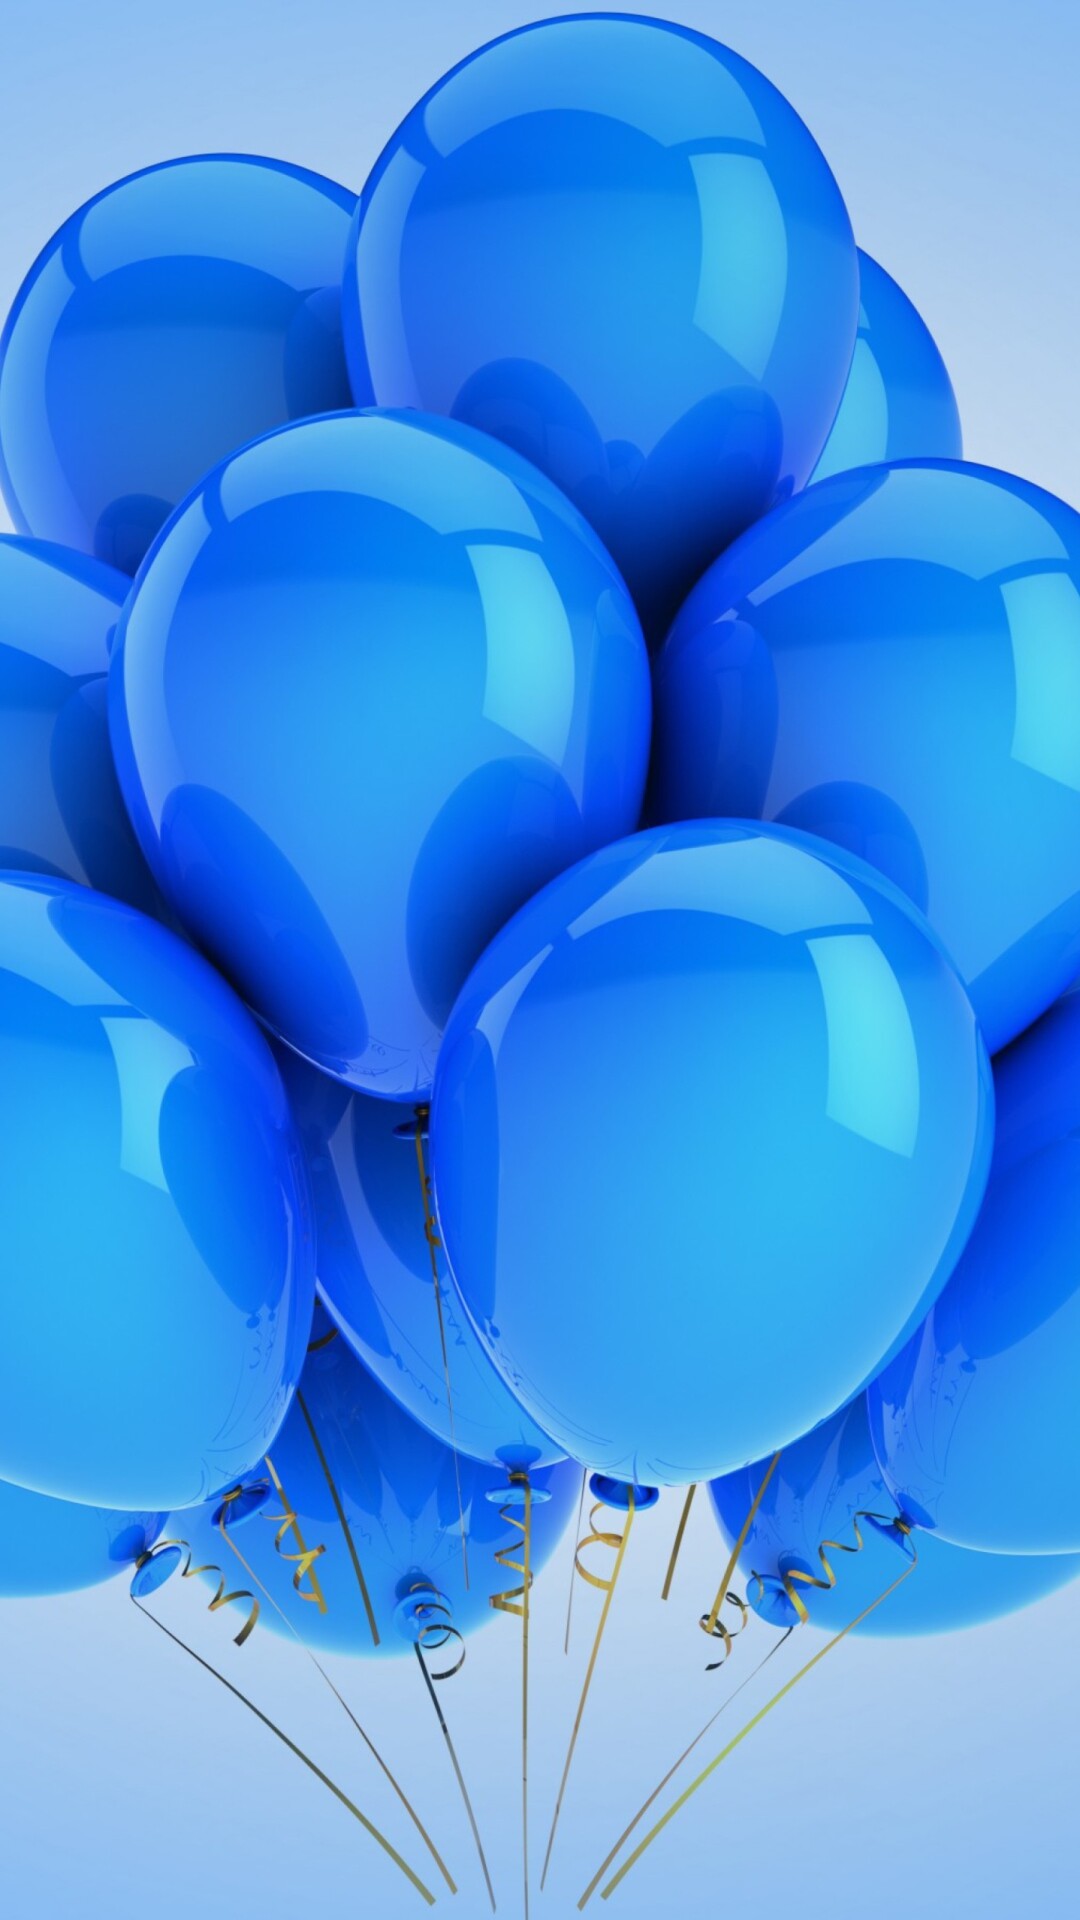 Balloons: A nonporous bag of light material that can be inflated with air or gas. 1080x1920 Full HD Background.